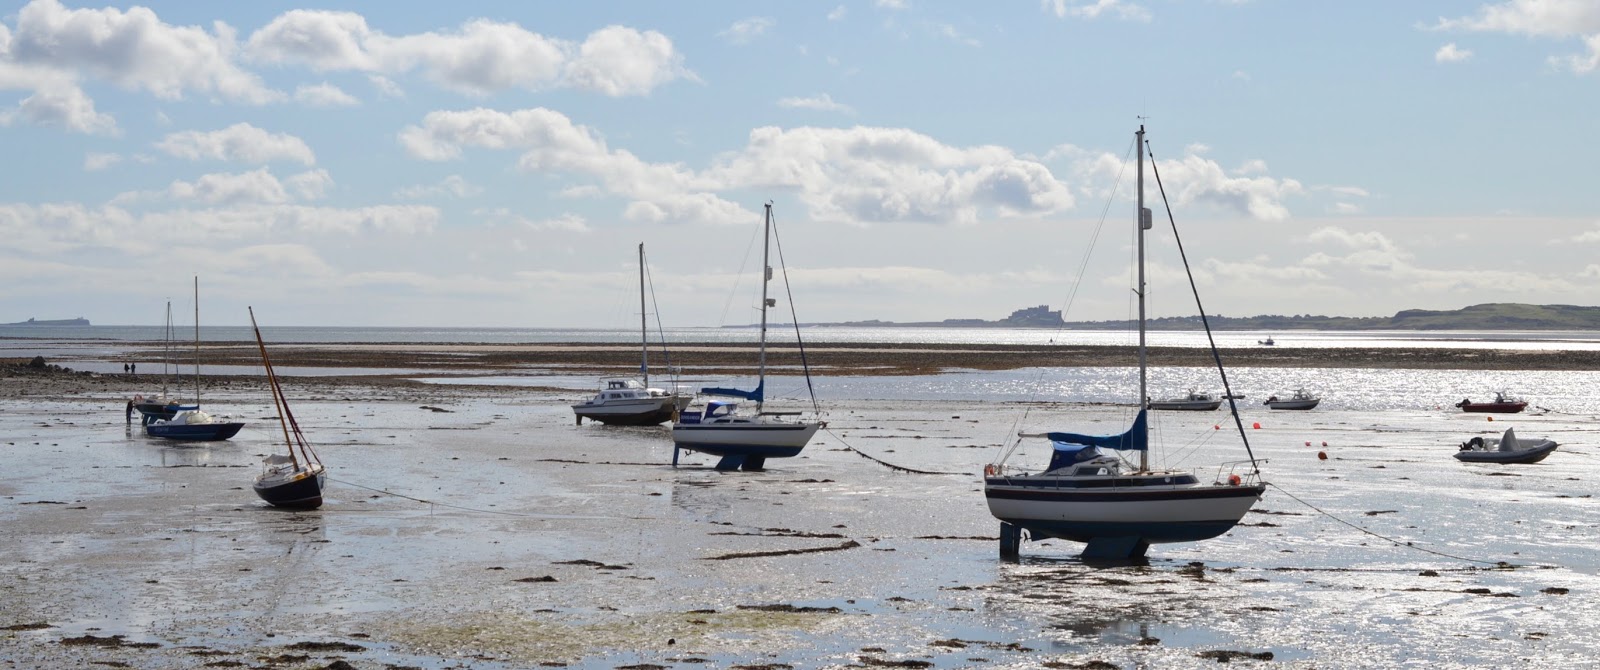 The Holy Island of Lindisfarne, Northumberland - what to see and do during a half day visit - view across harbour to bamburgh castle 